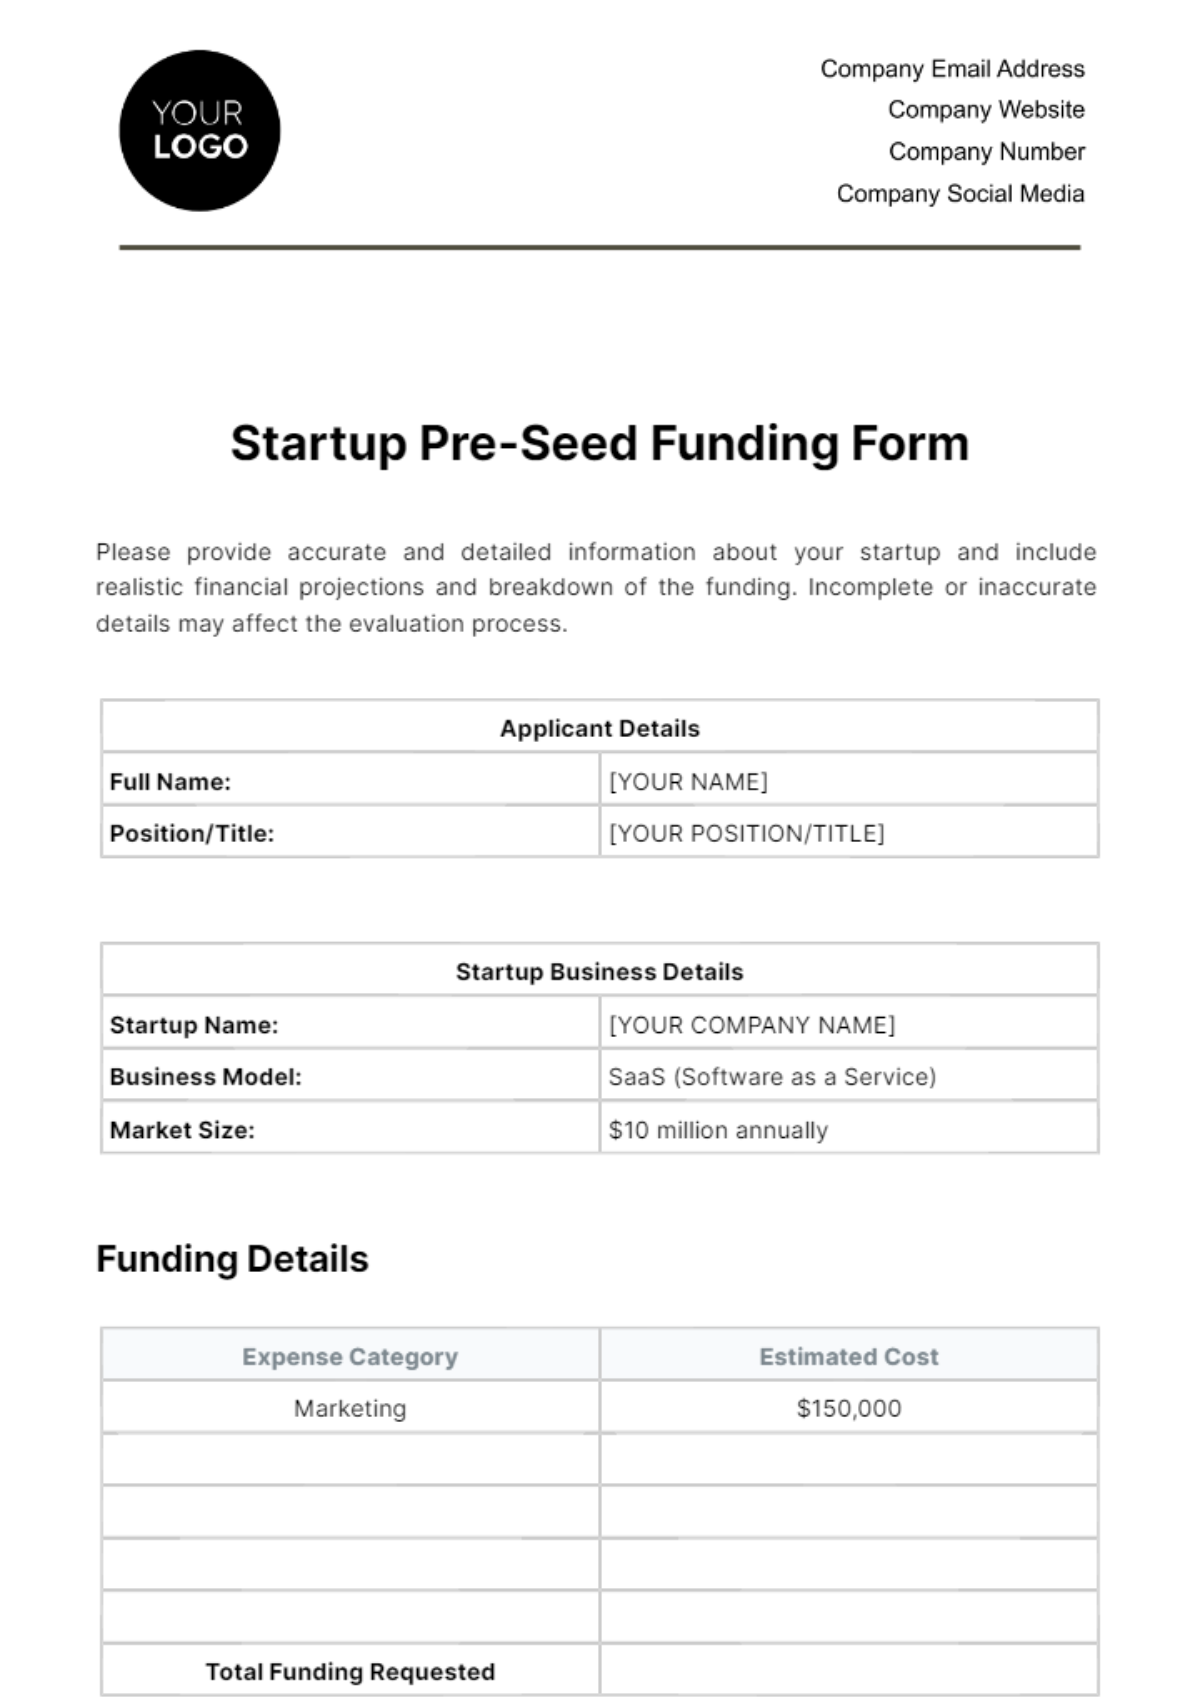 Startup Pre-Seed Funding Form Template